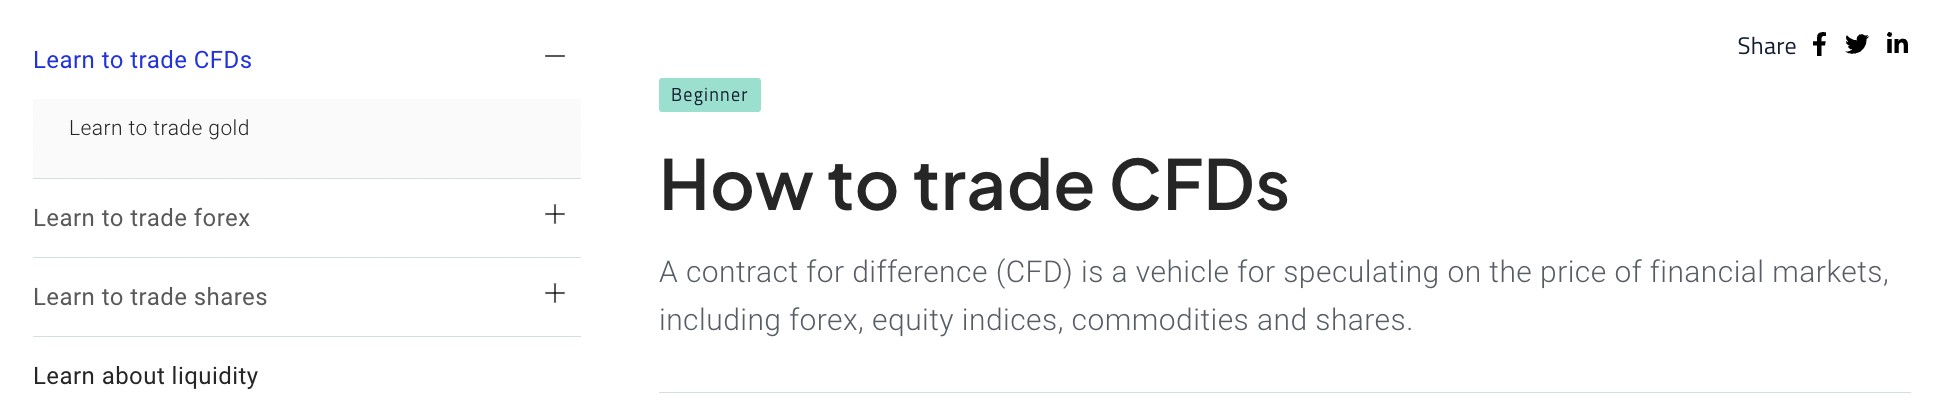 Pepperstone guide on how to trade CFDs